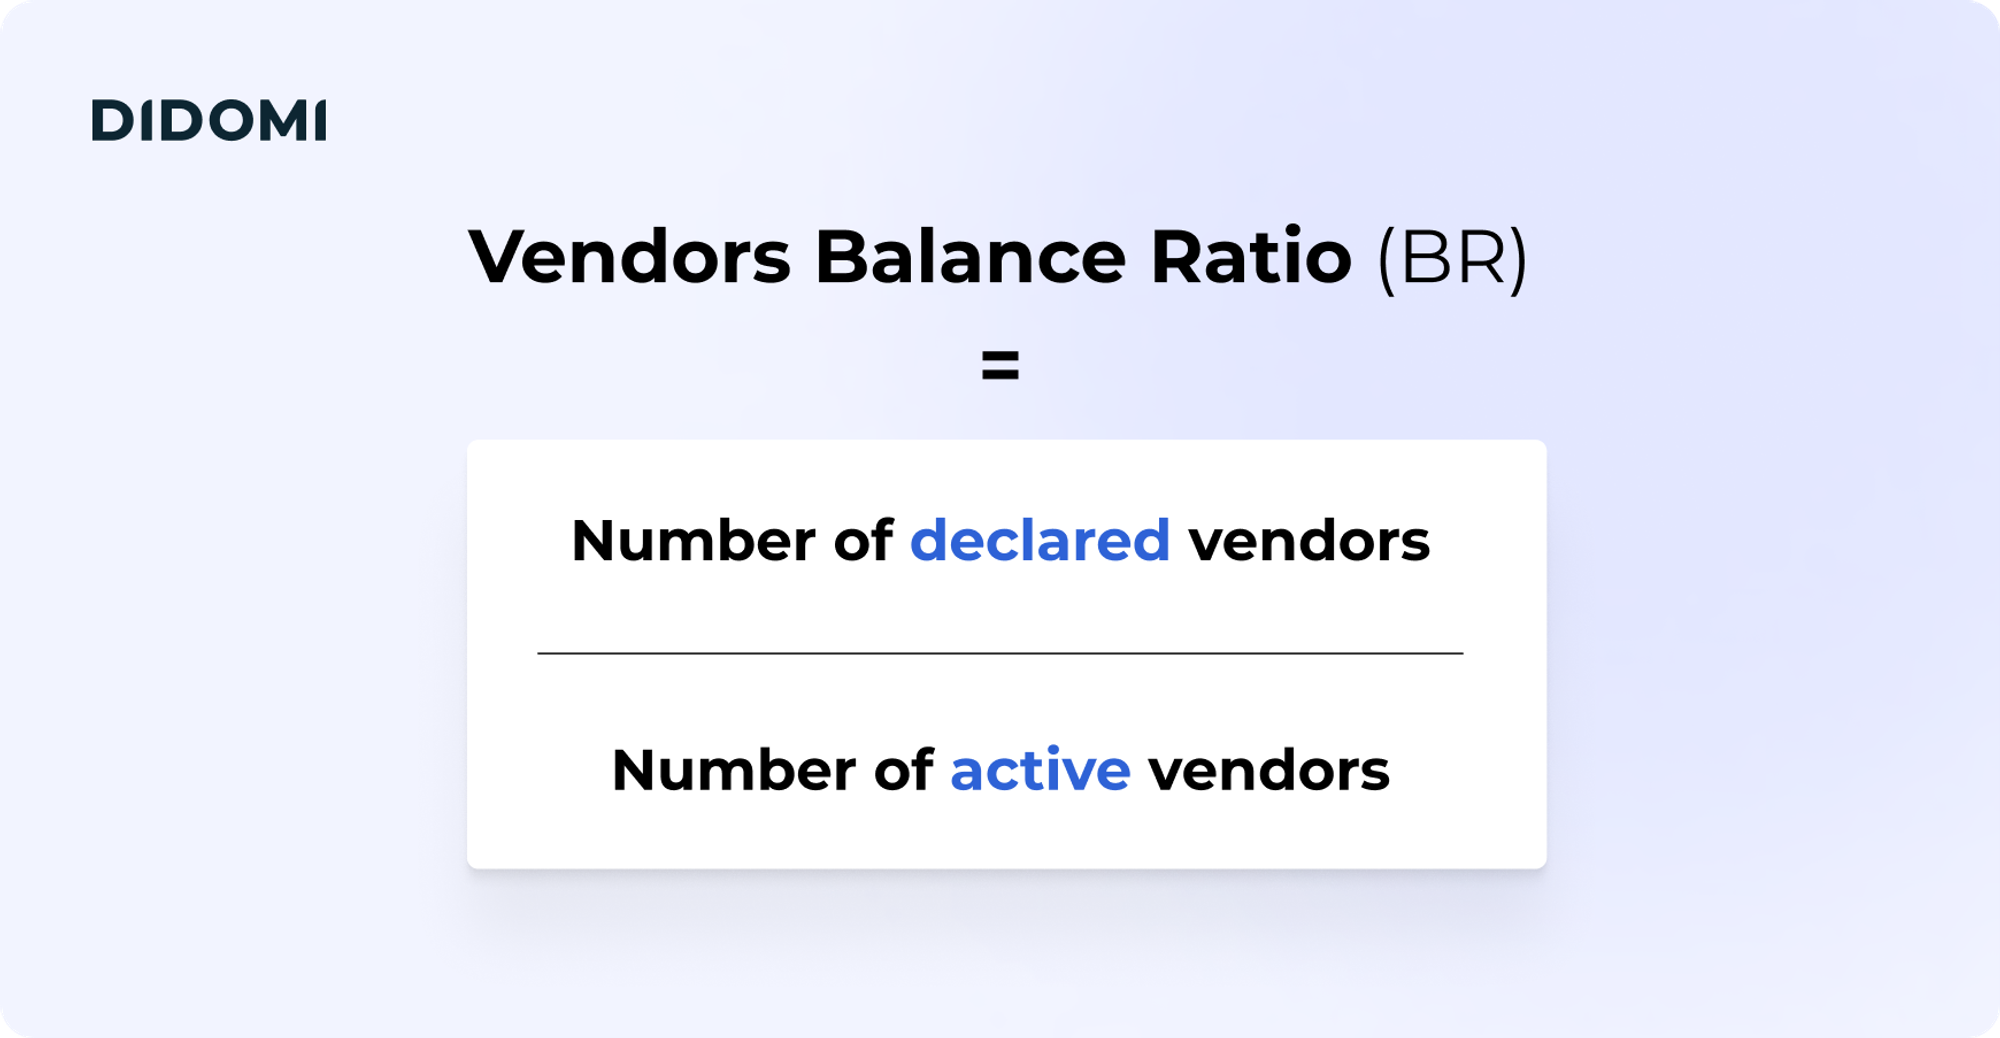 Image of a calculation, explaining that the Vendors Balance Ratio or "BR" is equal to the number of declared vendors divided by the number of active vendors